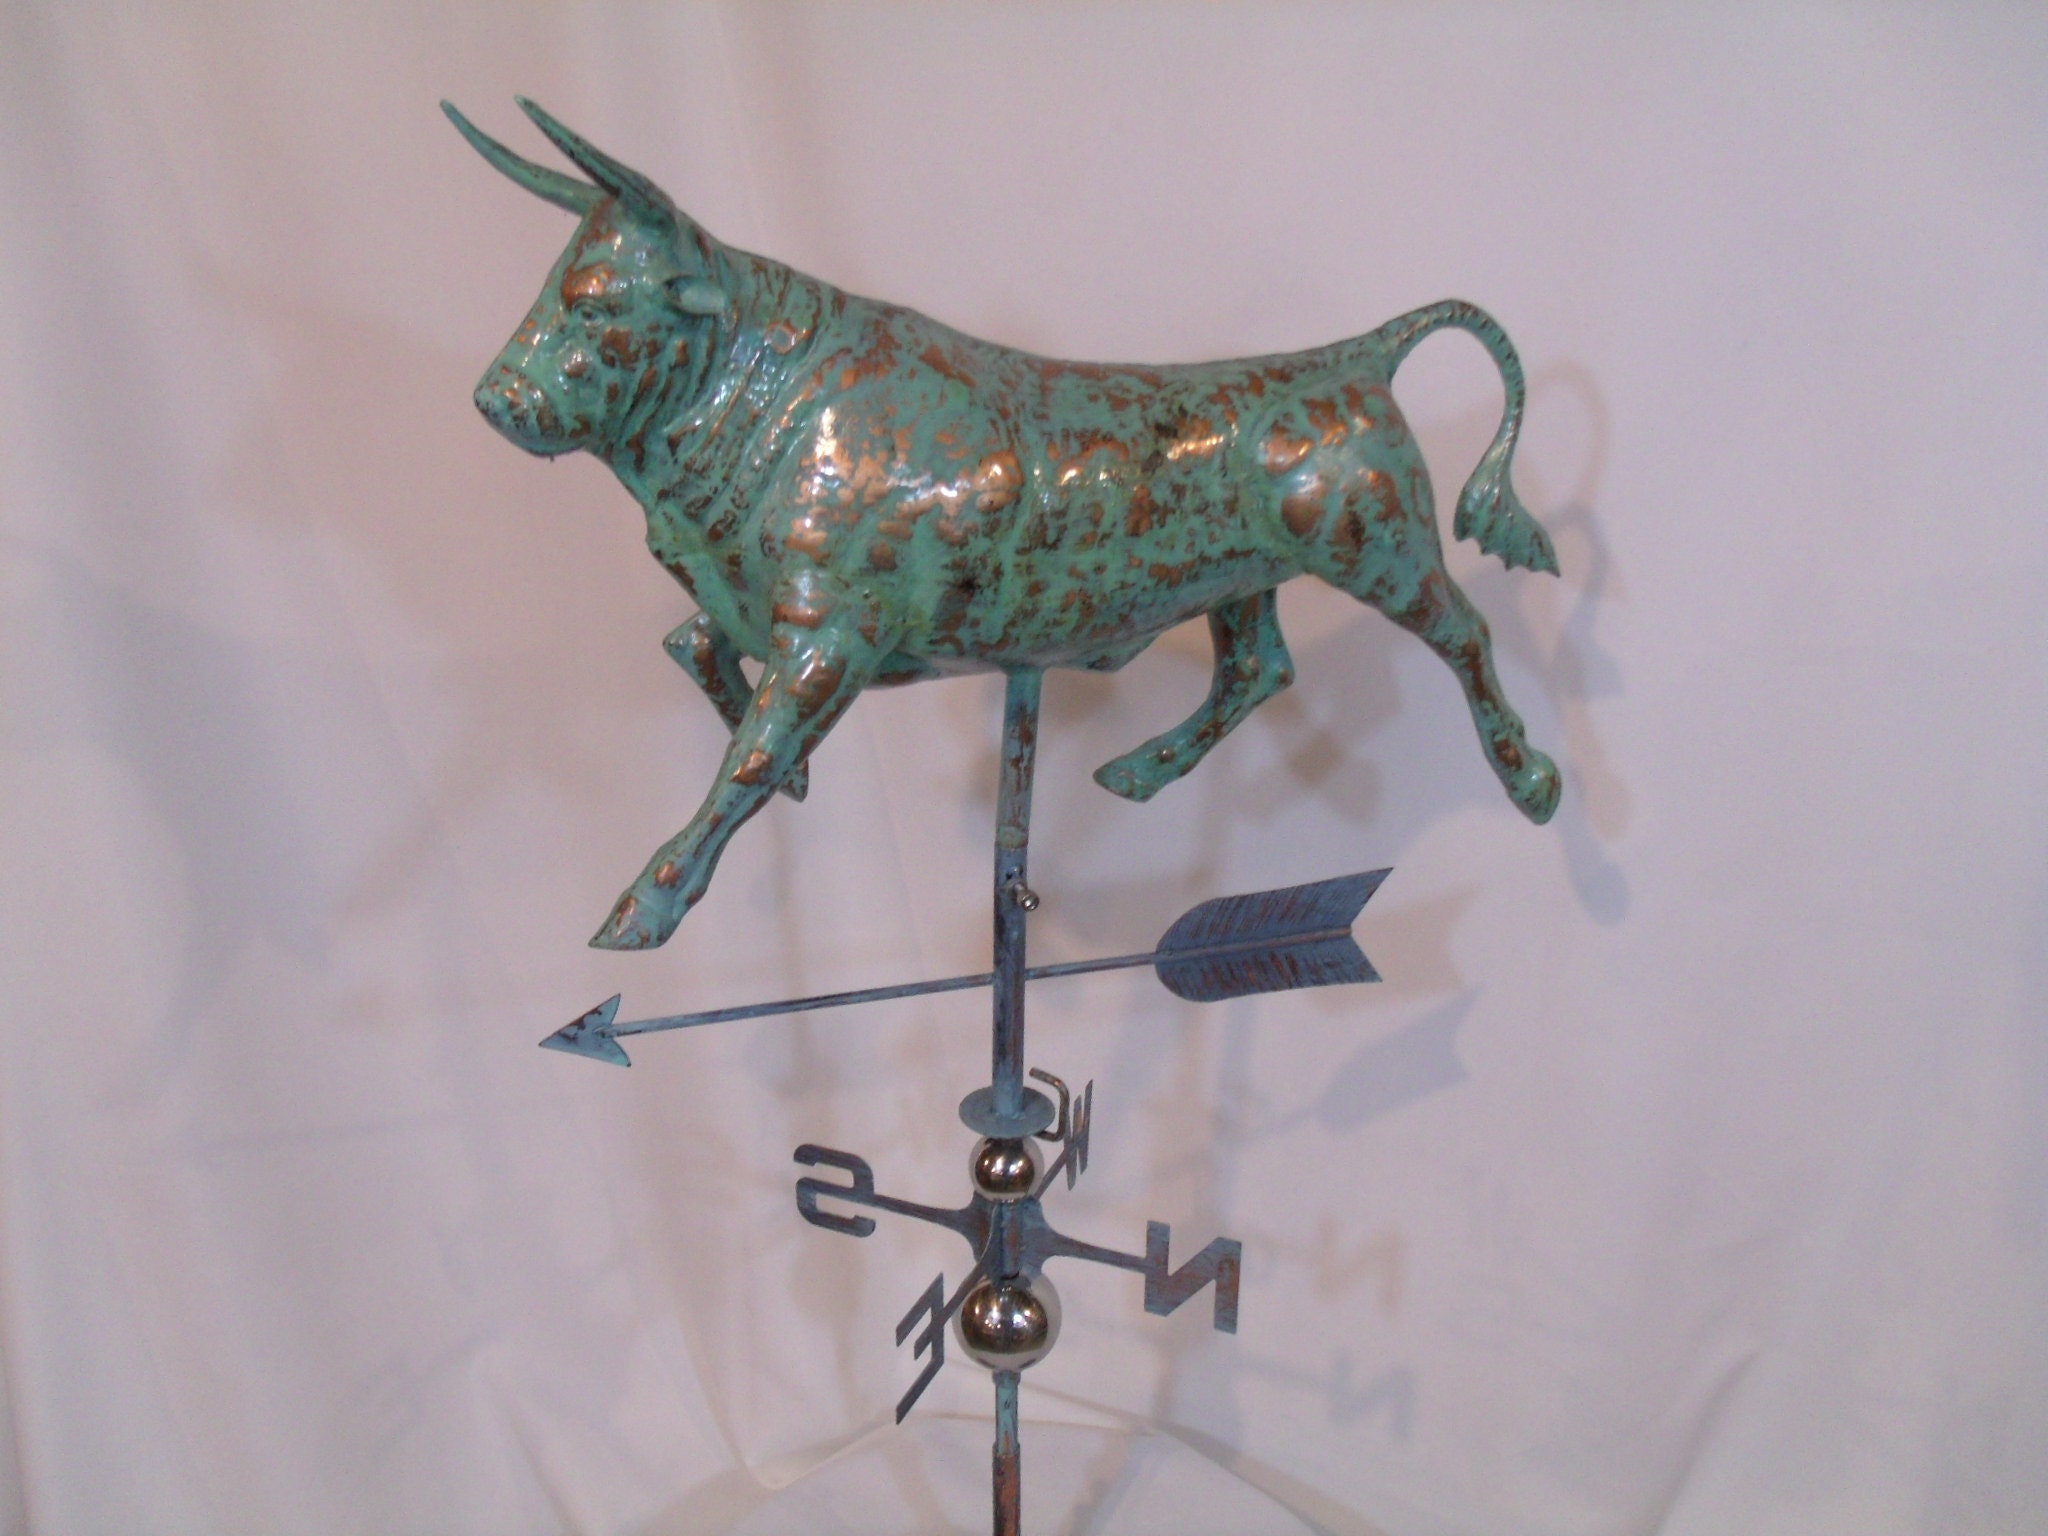 Bull 3D Steer Weathervane Antiqued Copper Finish Cow Weather Vane Hand Crafted 